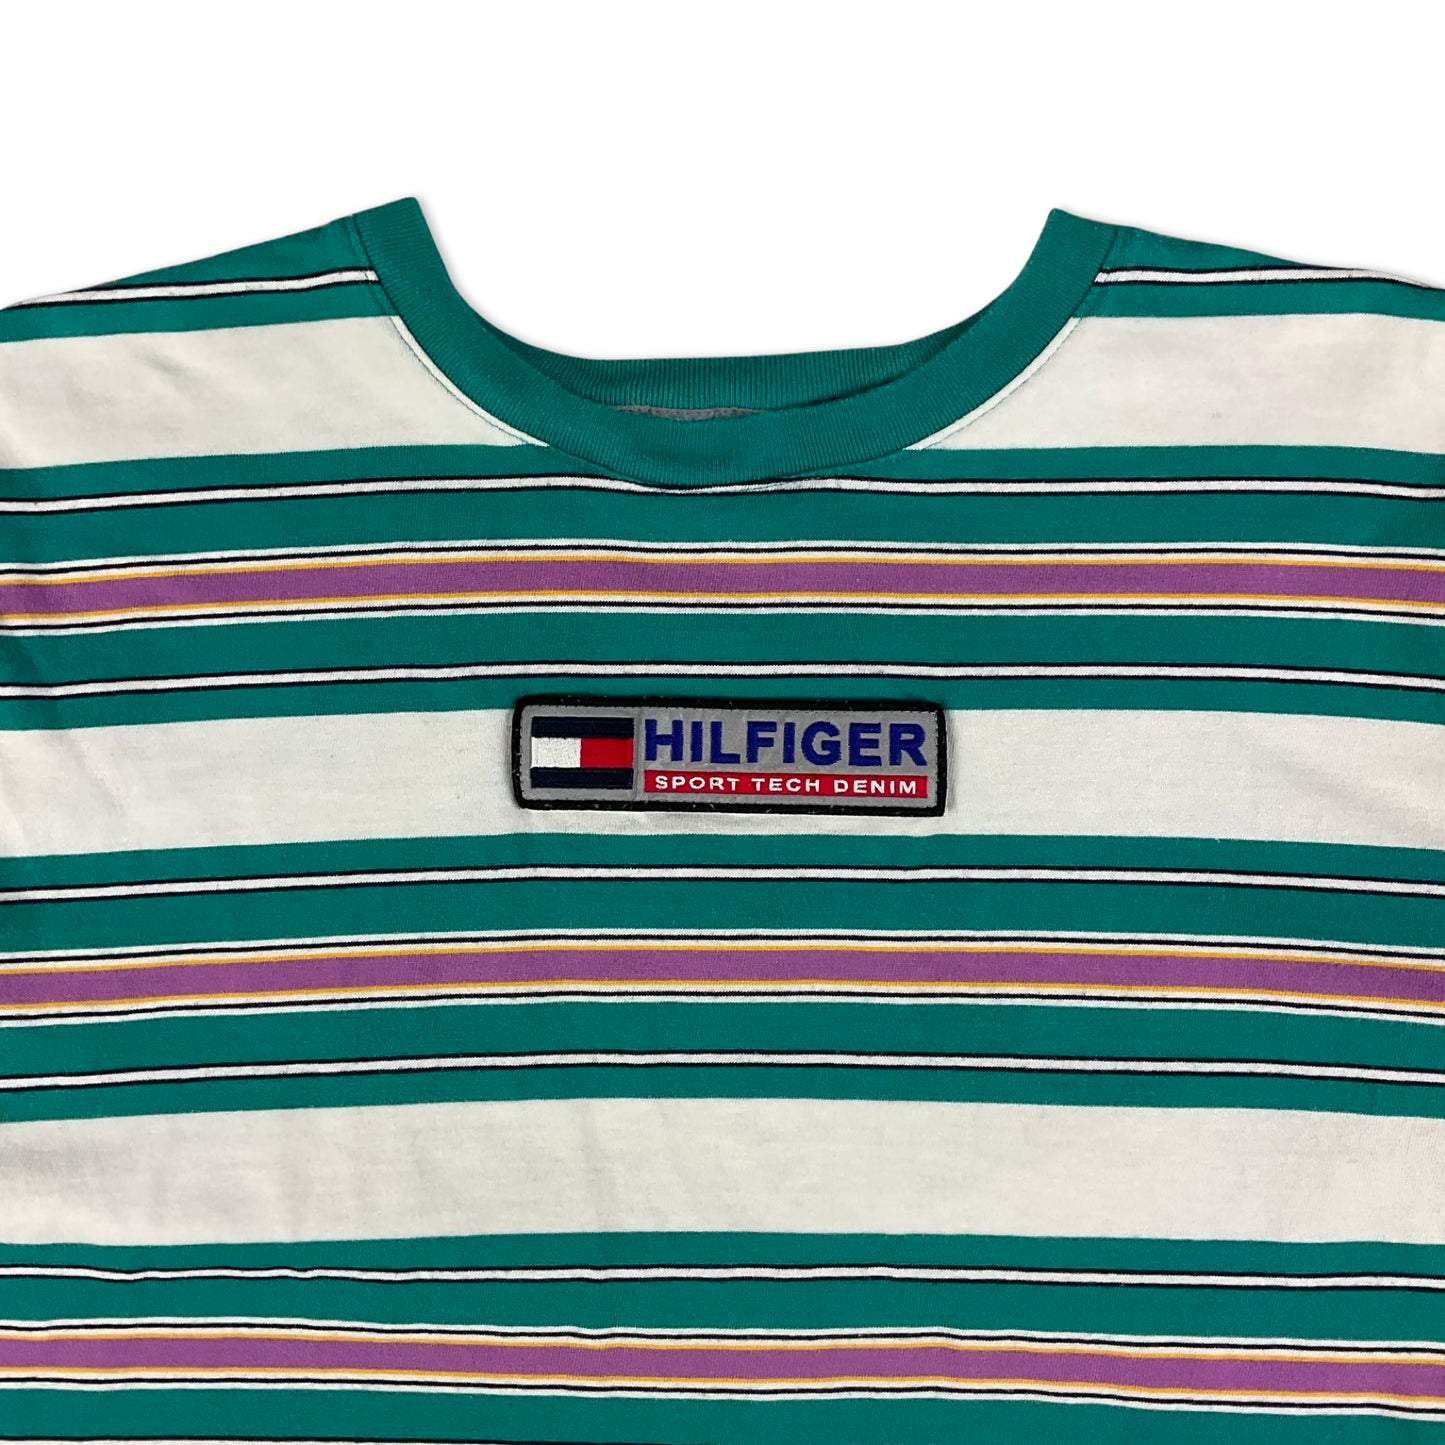 Tommy Hilfiger White Teal & Pink Striped Tee S M